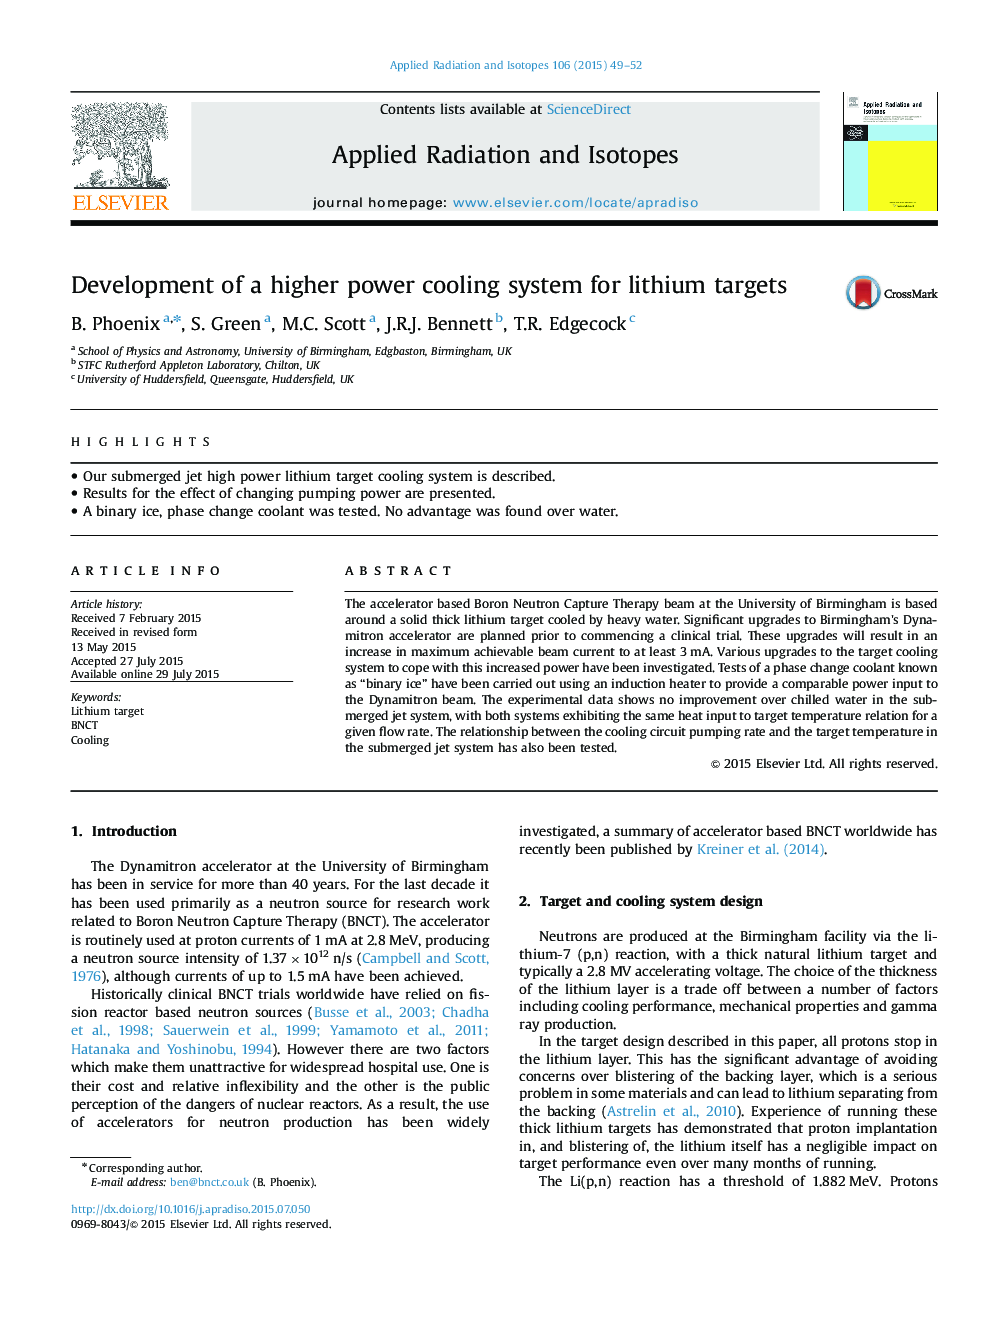 Development of a higher power cooling system for lithium targets